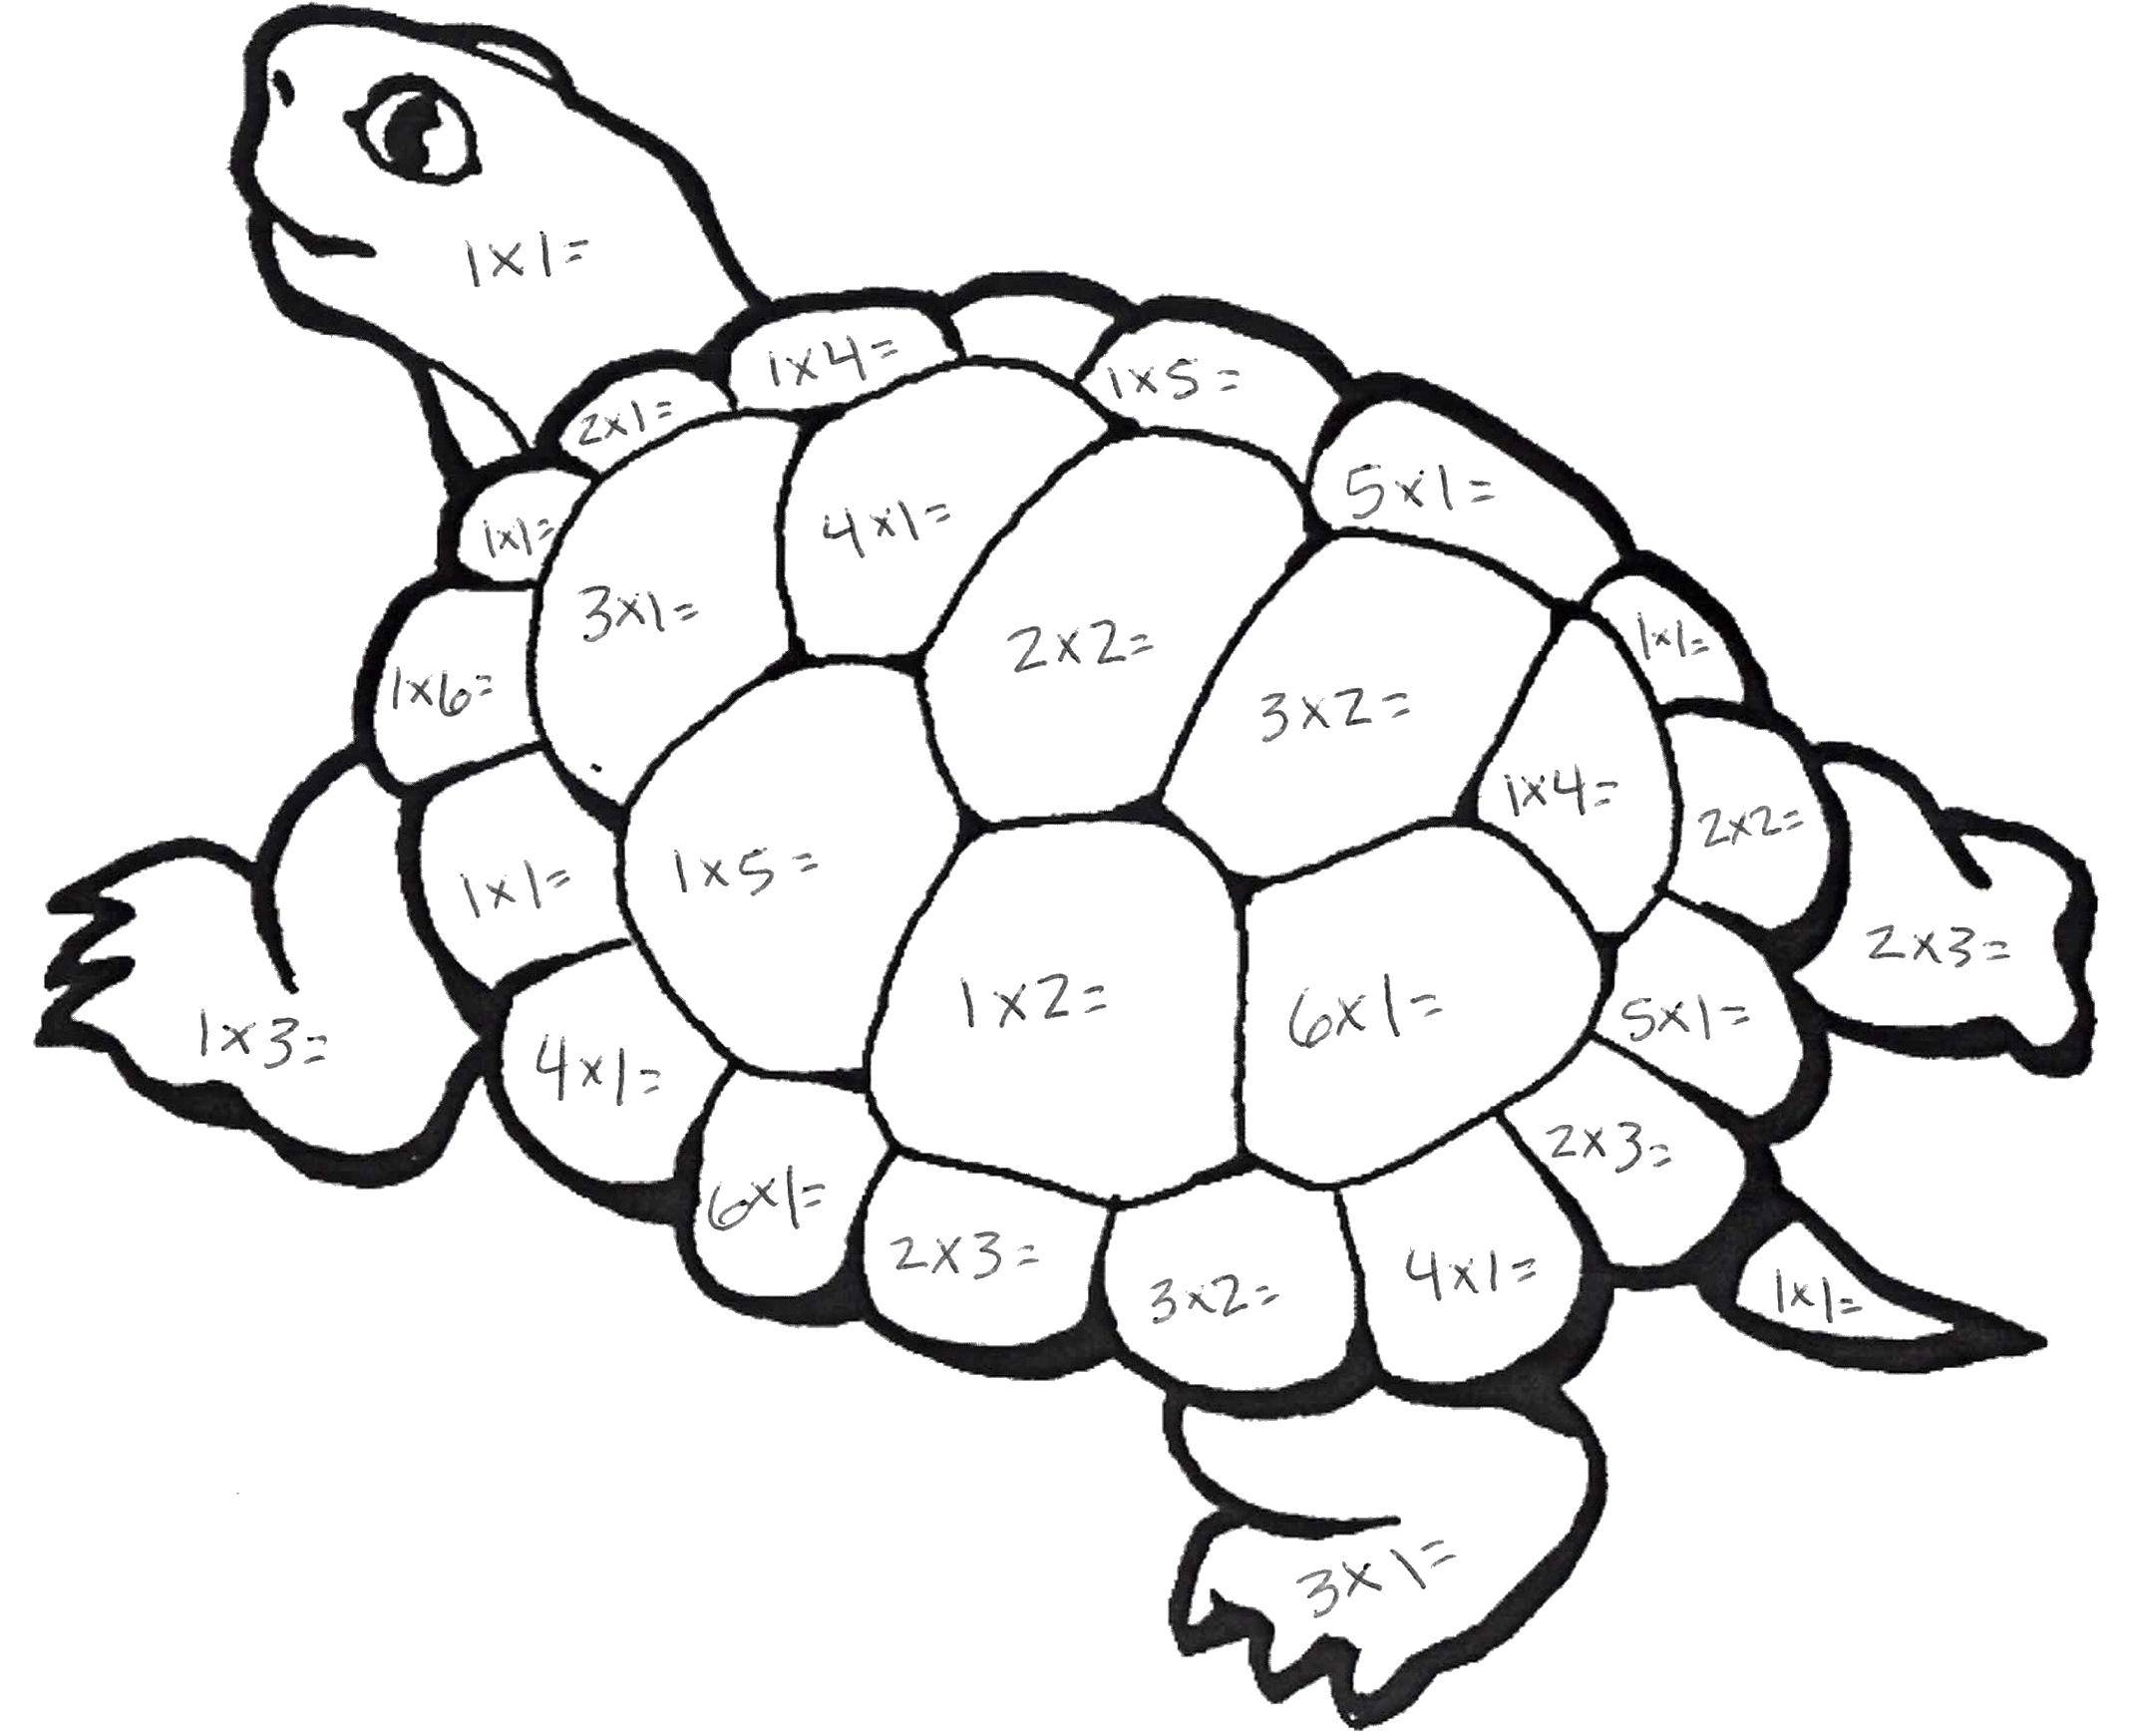 Coloring Painting by numbers shell. Category mathematical coloring pages. Tags:  Math, counting, logic.